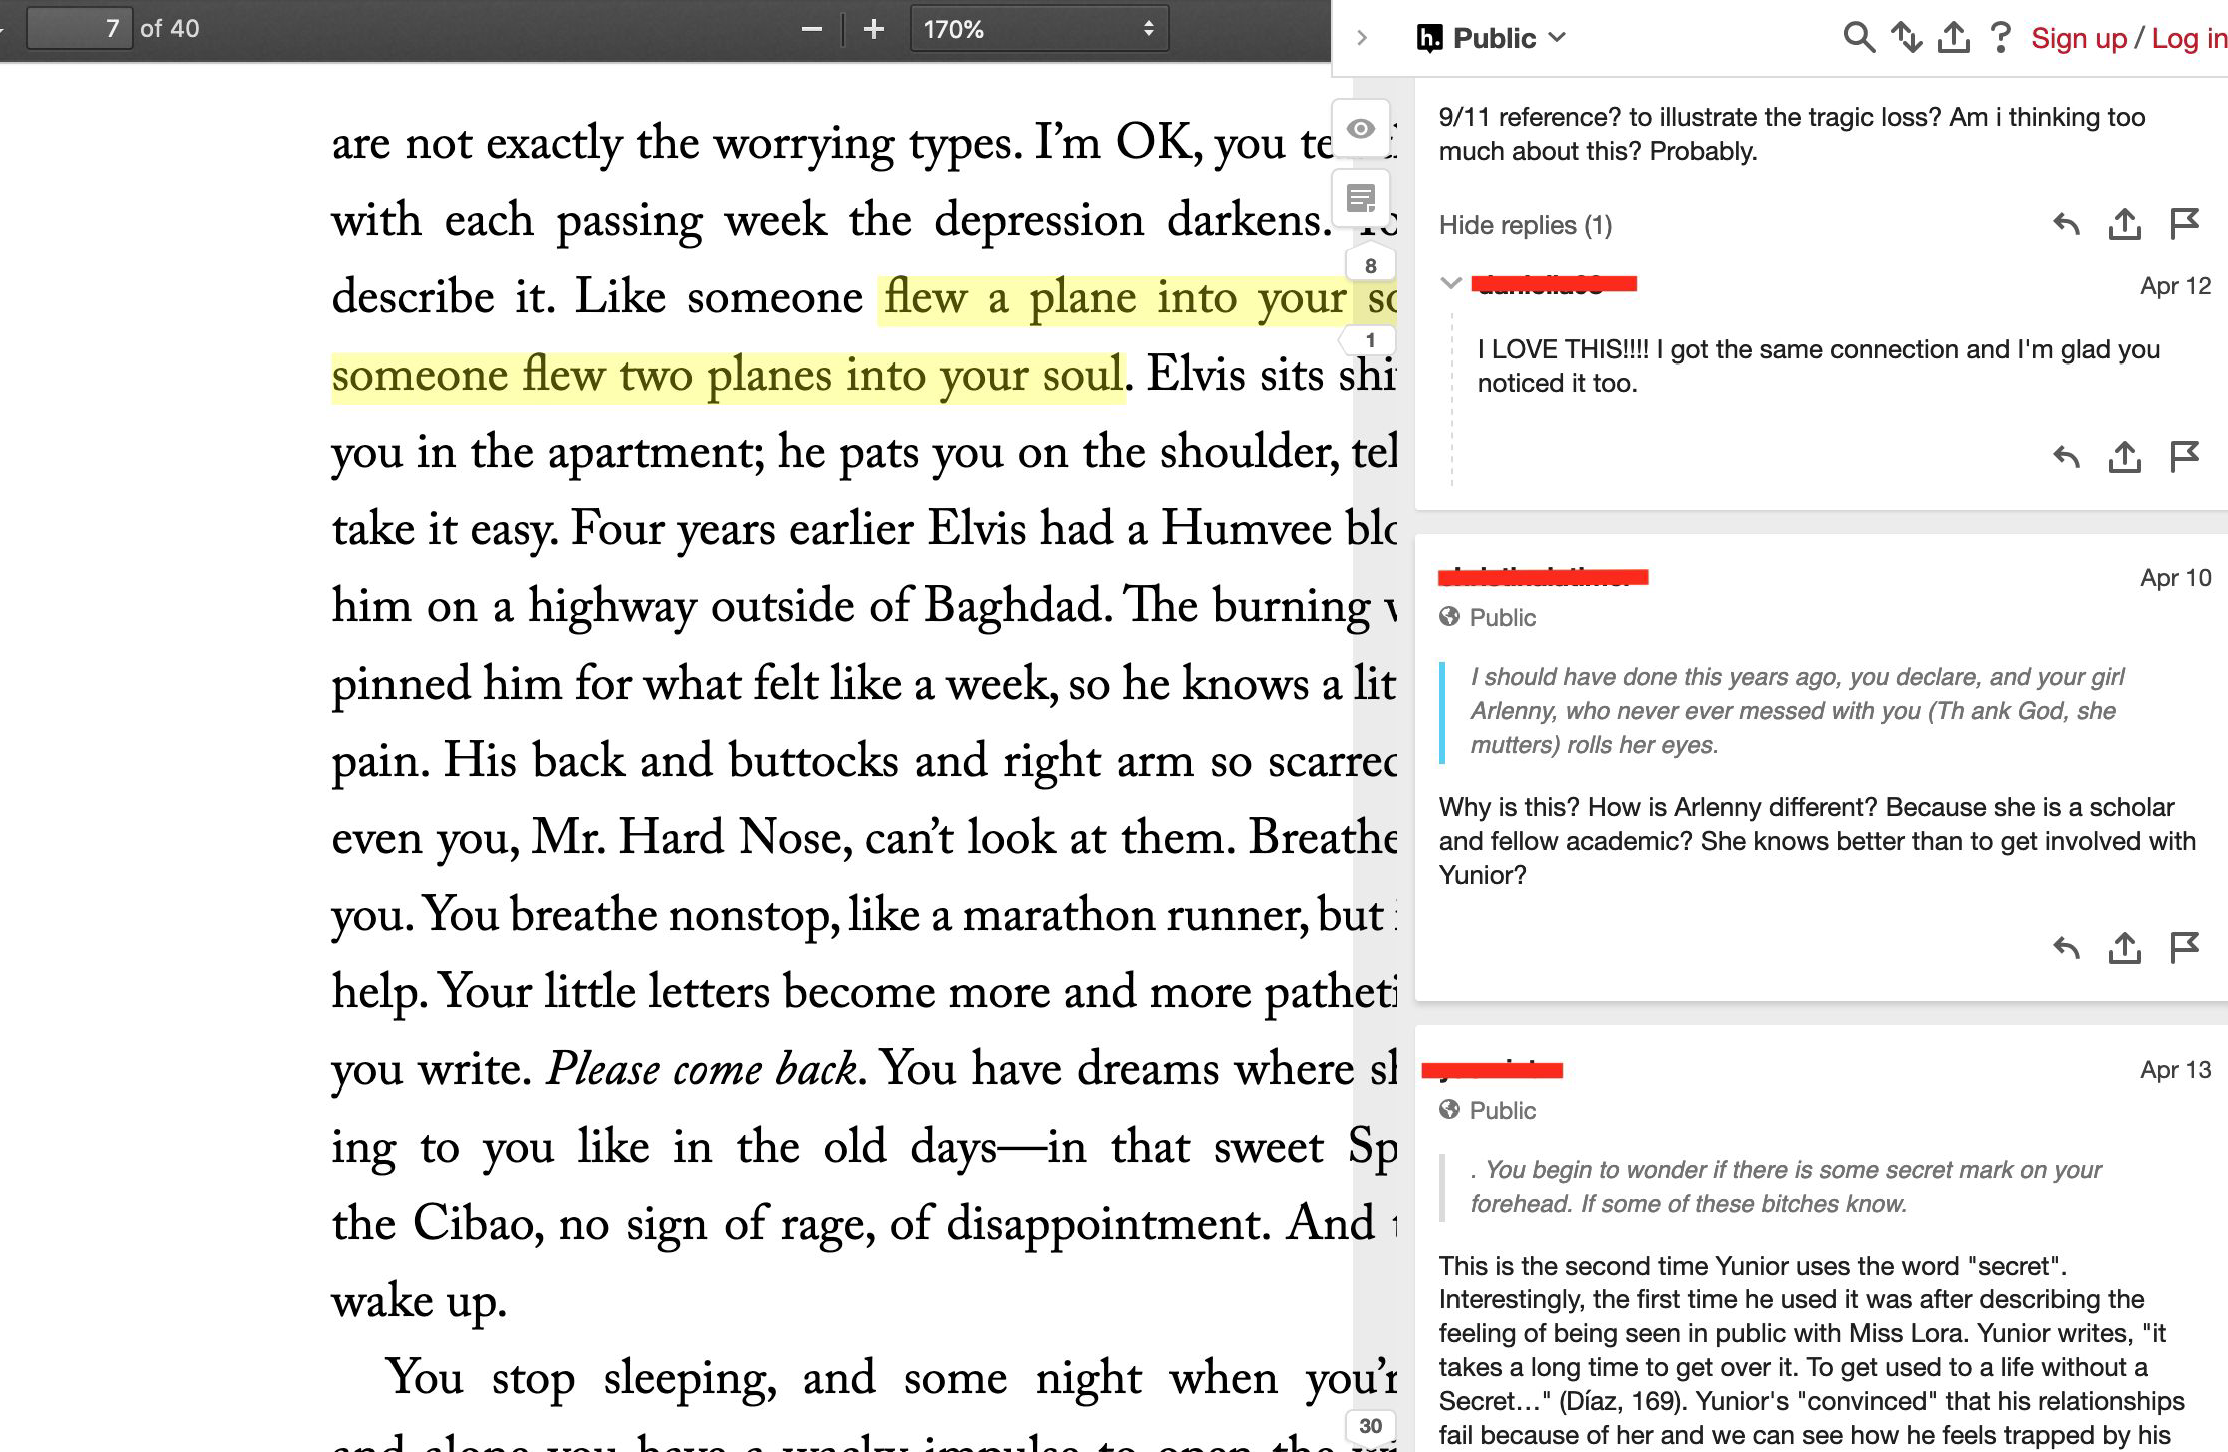 Image using hypothesis to highlight and comment on textual elements in Junot Diaz